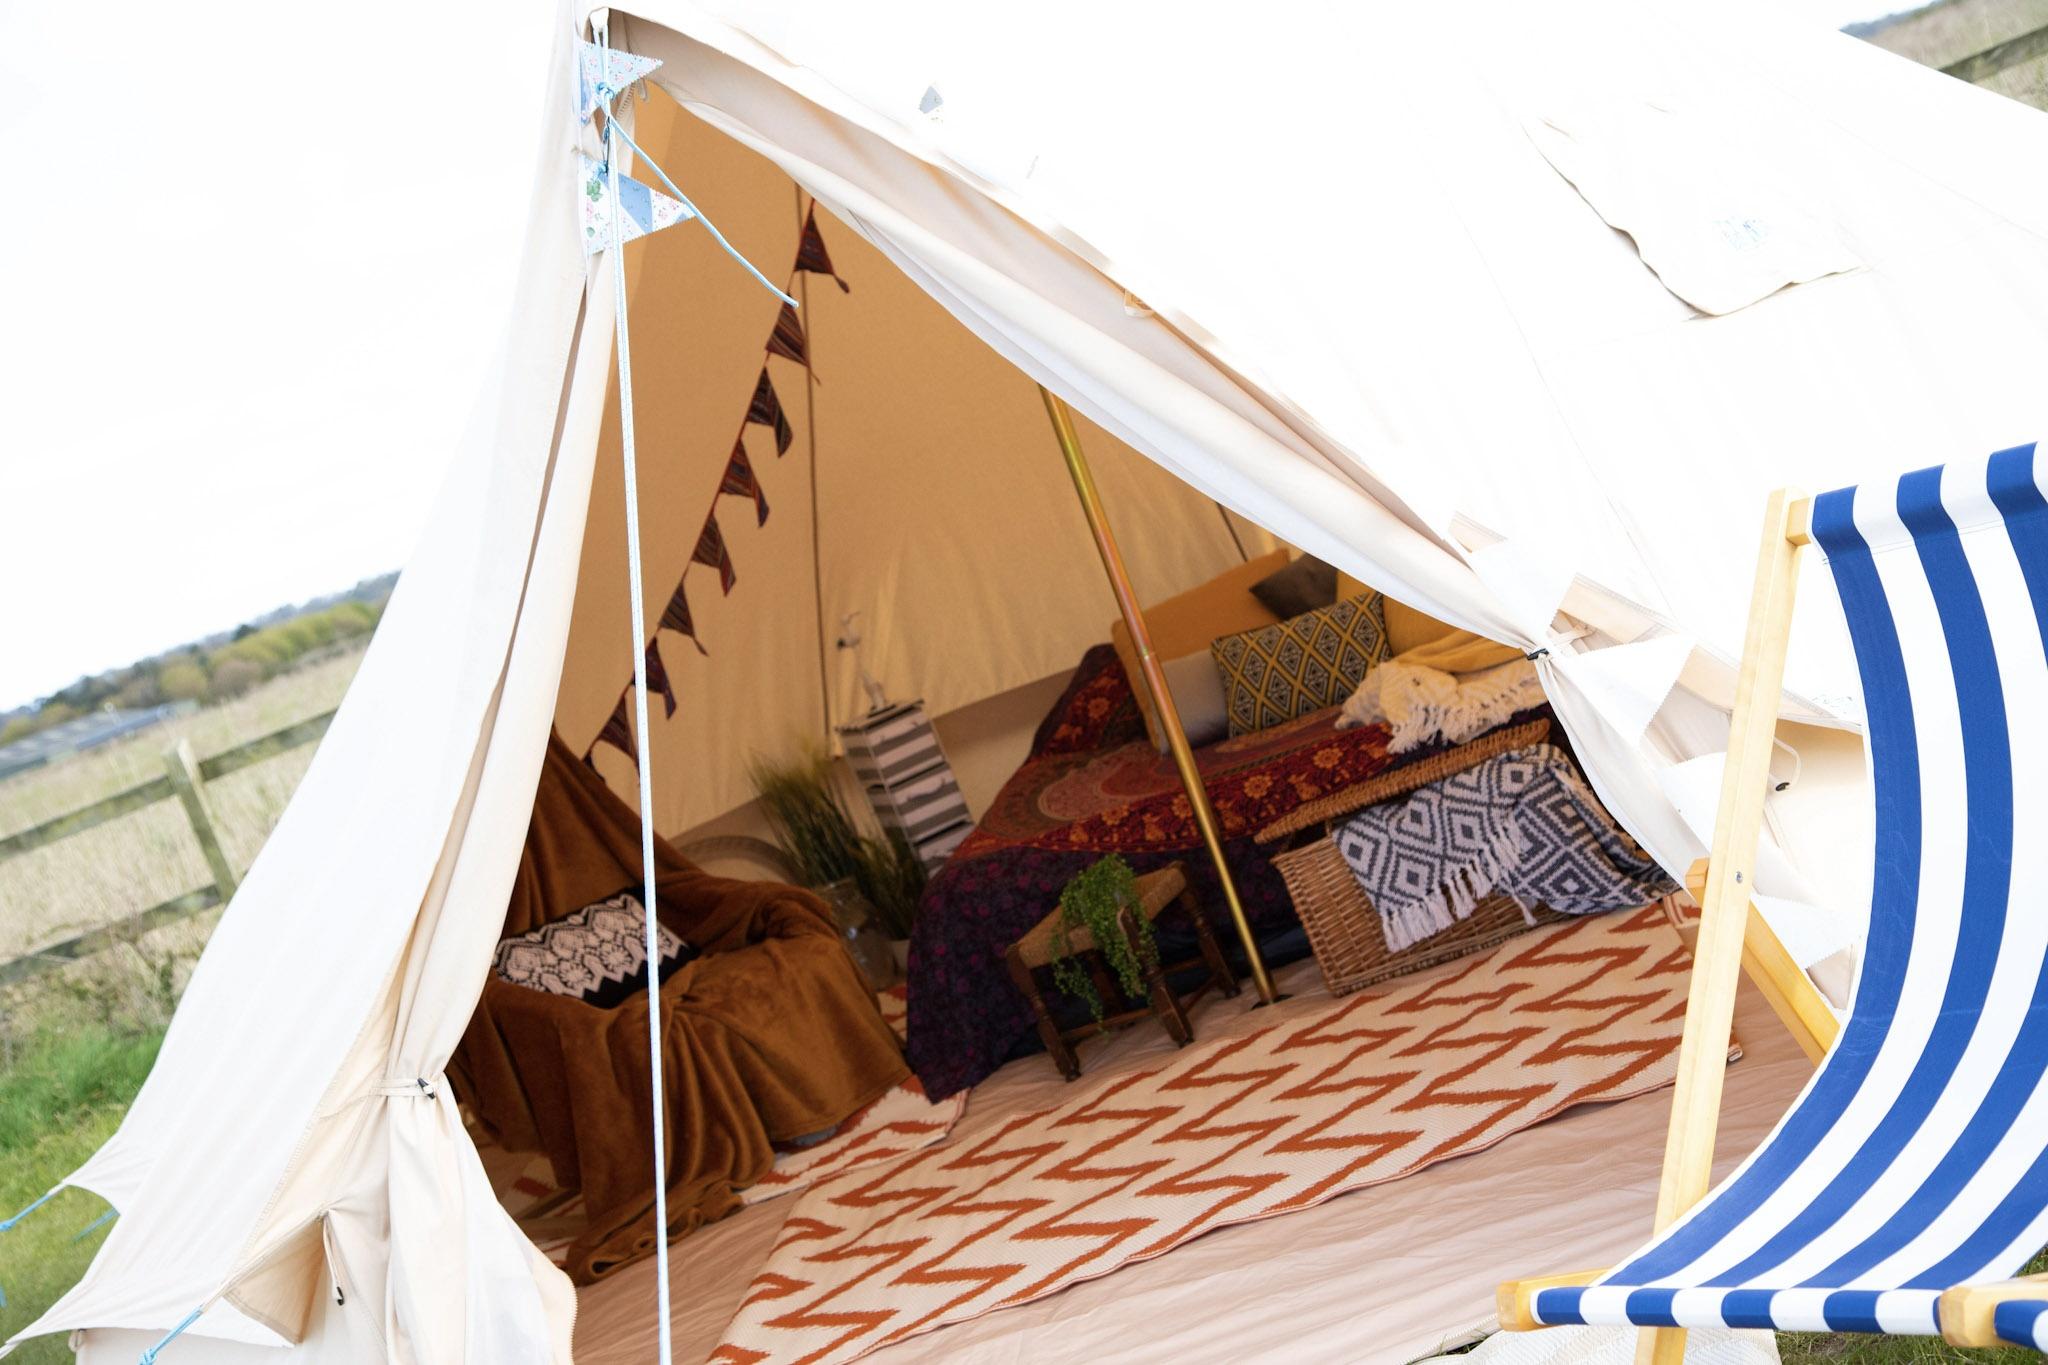 GLAMPING ACCOMMODATIONS NEAR THE SEA